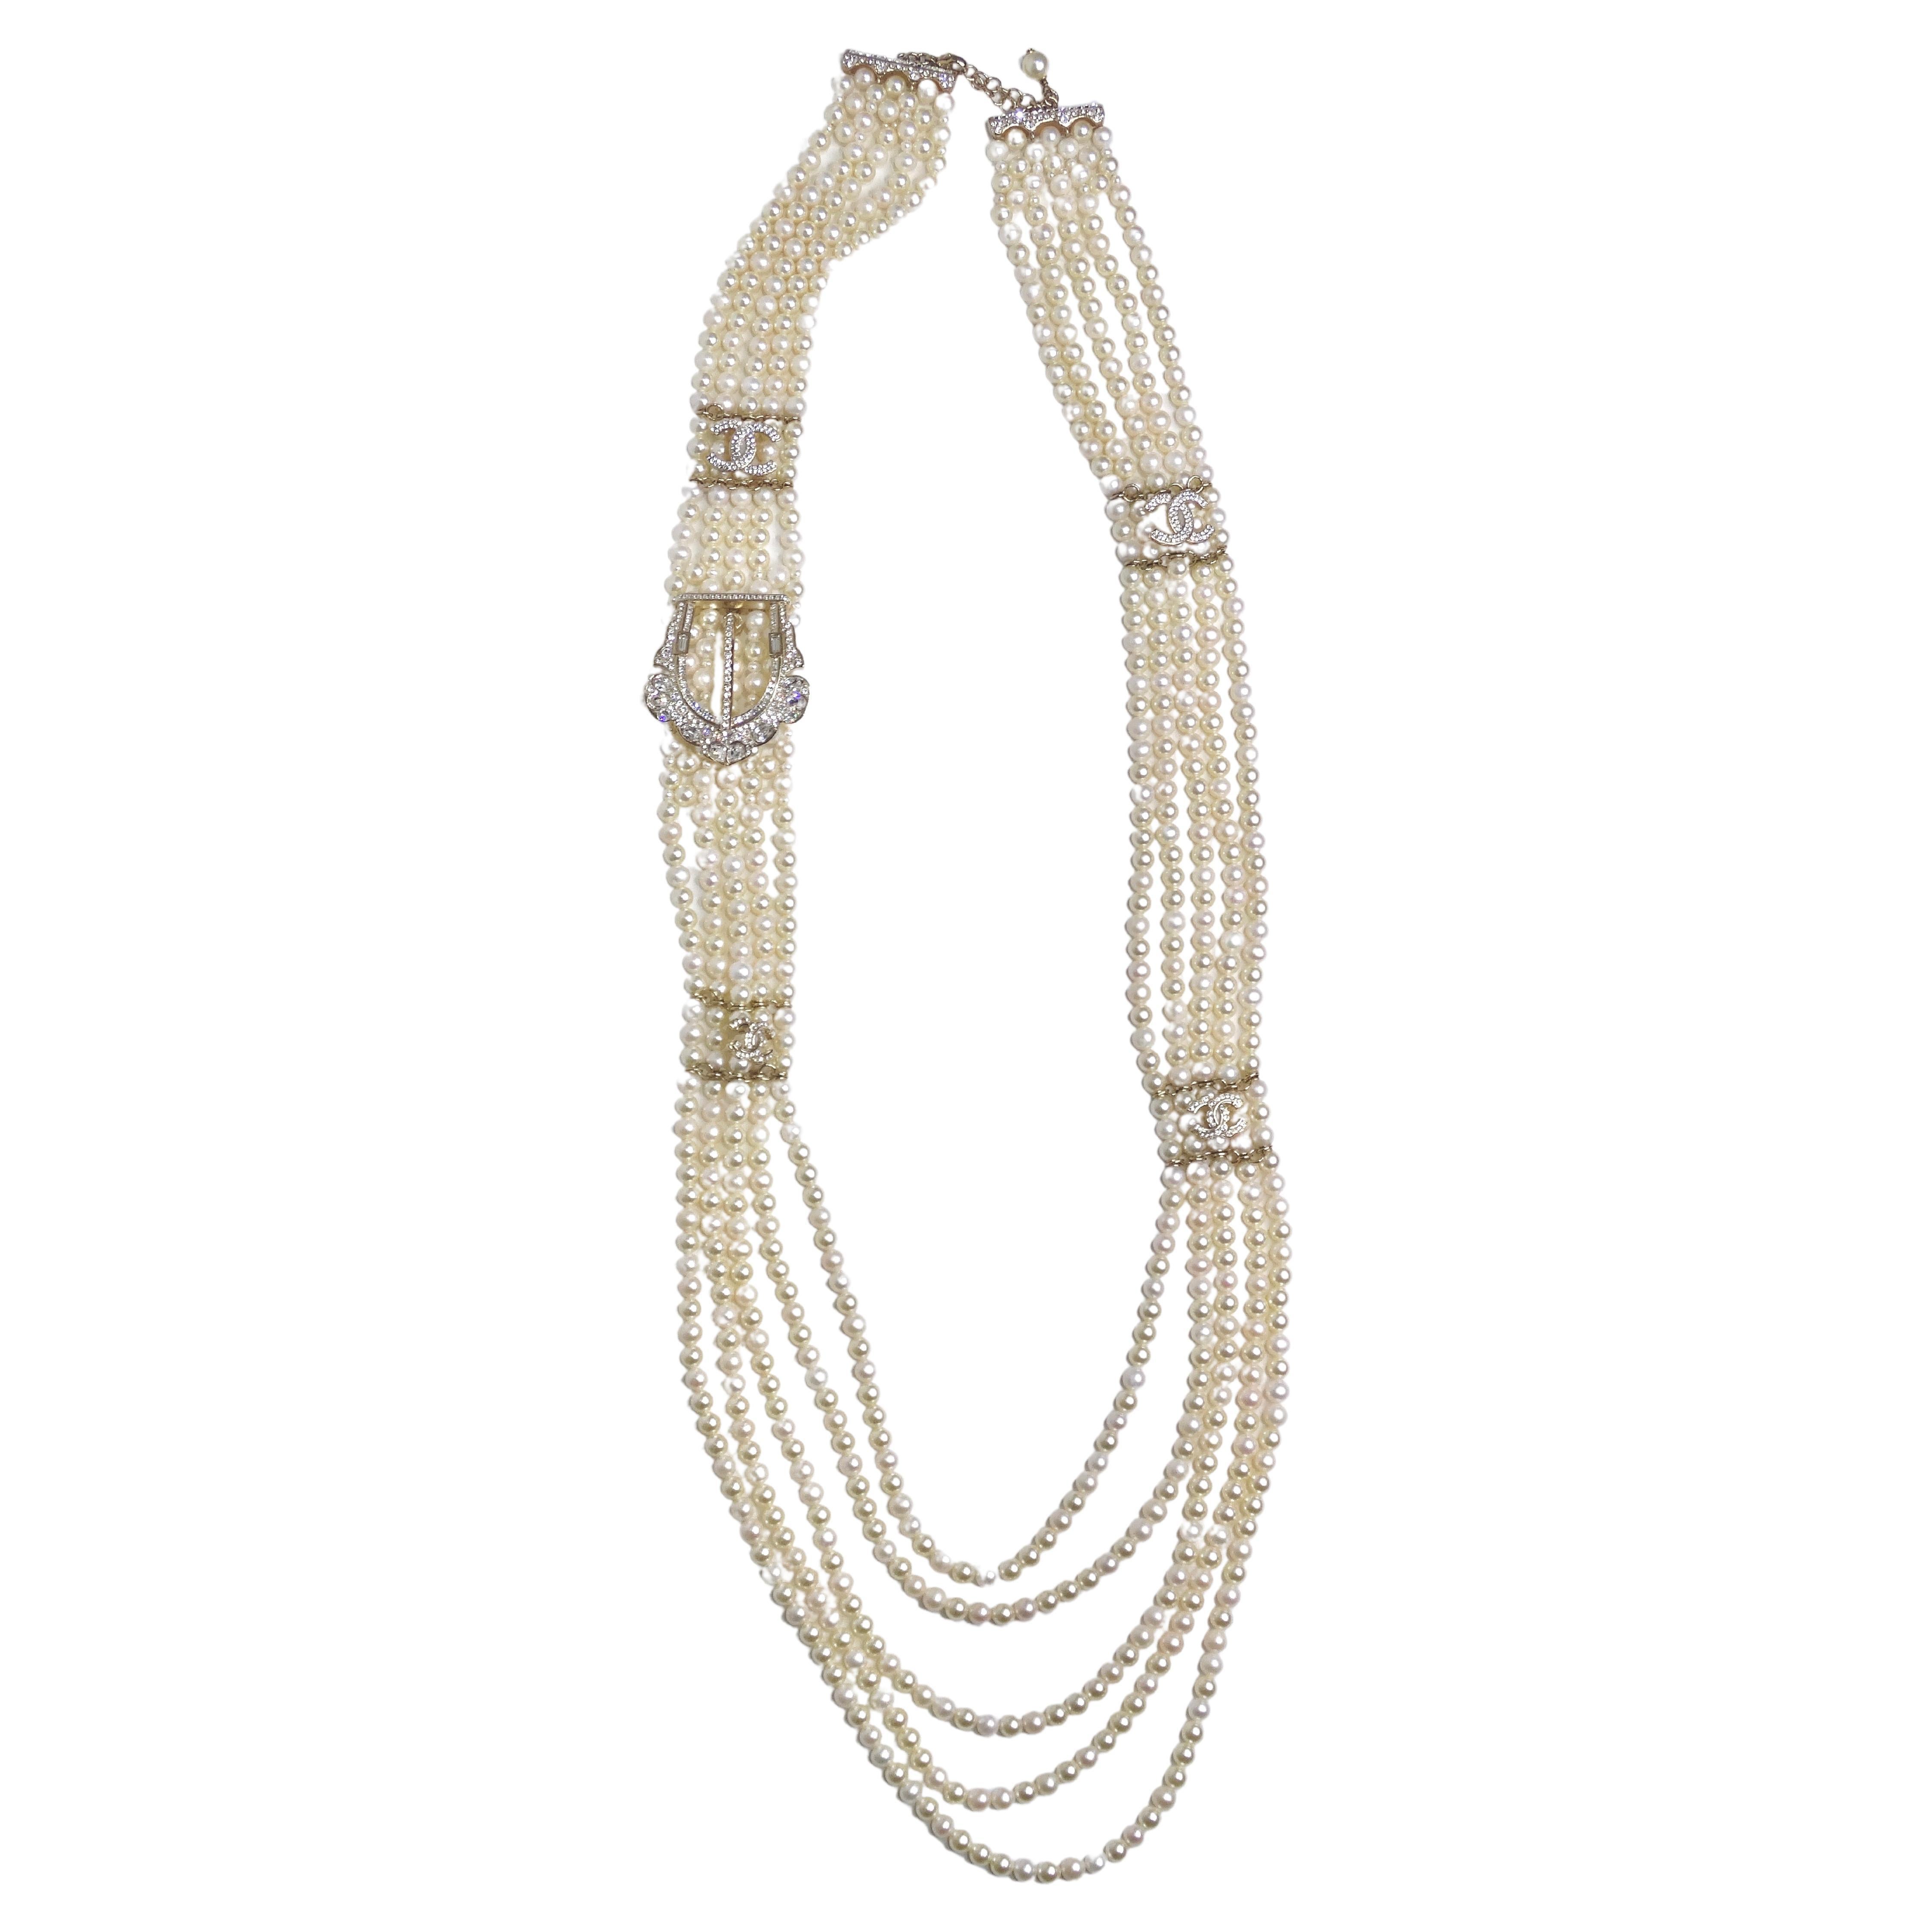 Chanel Pearls & Crystal Buckle Multi-Strand Necklace